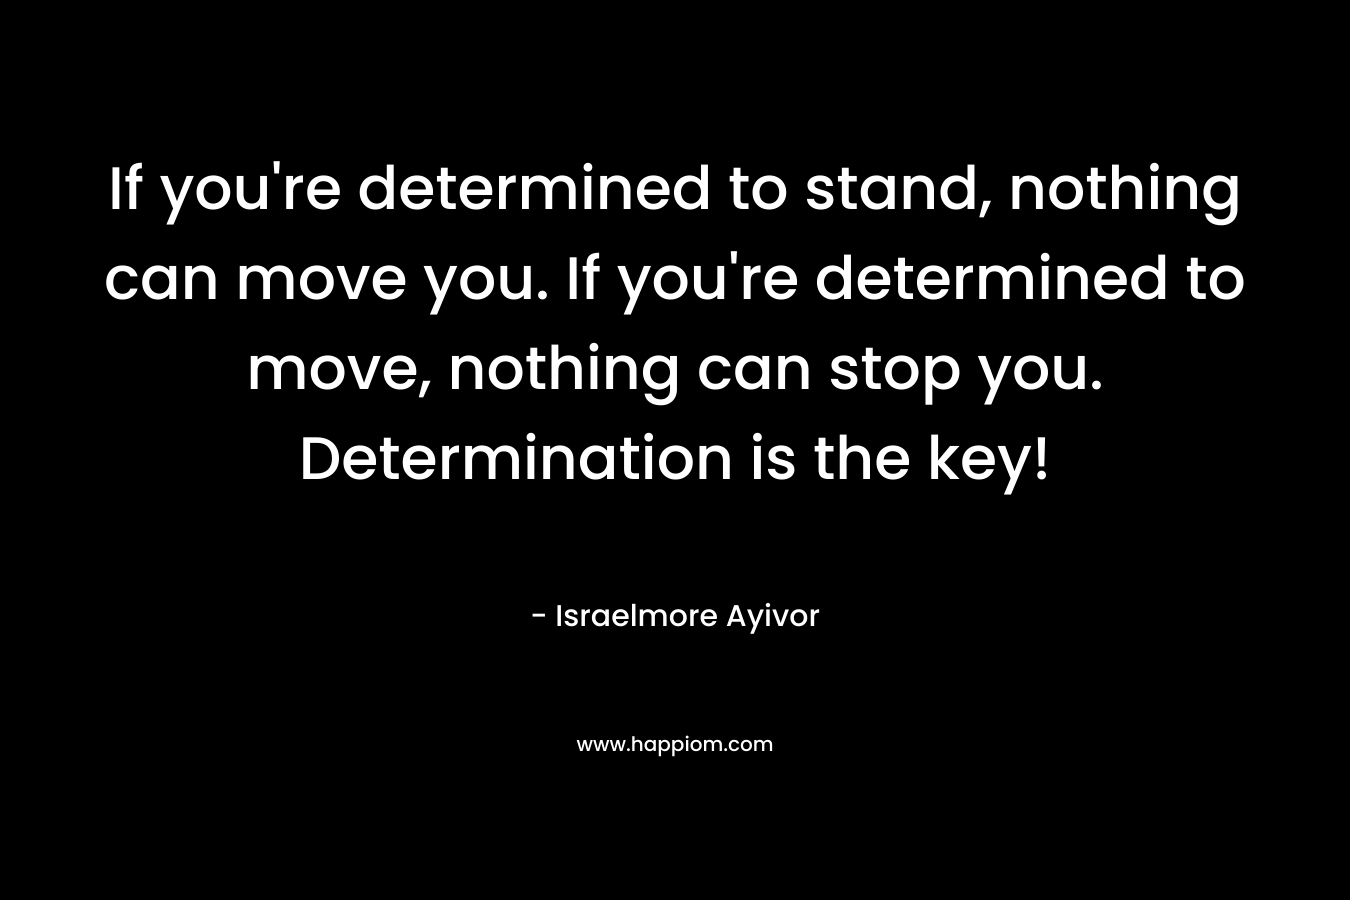 If you're determined to stand, nothing can move you. If you're determined to move, nothing can stop you. Determination is the key!